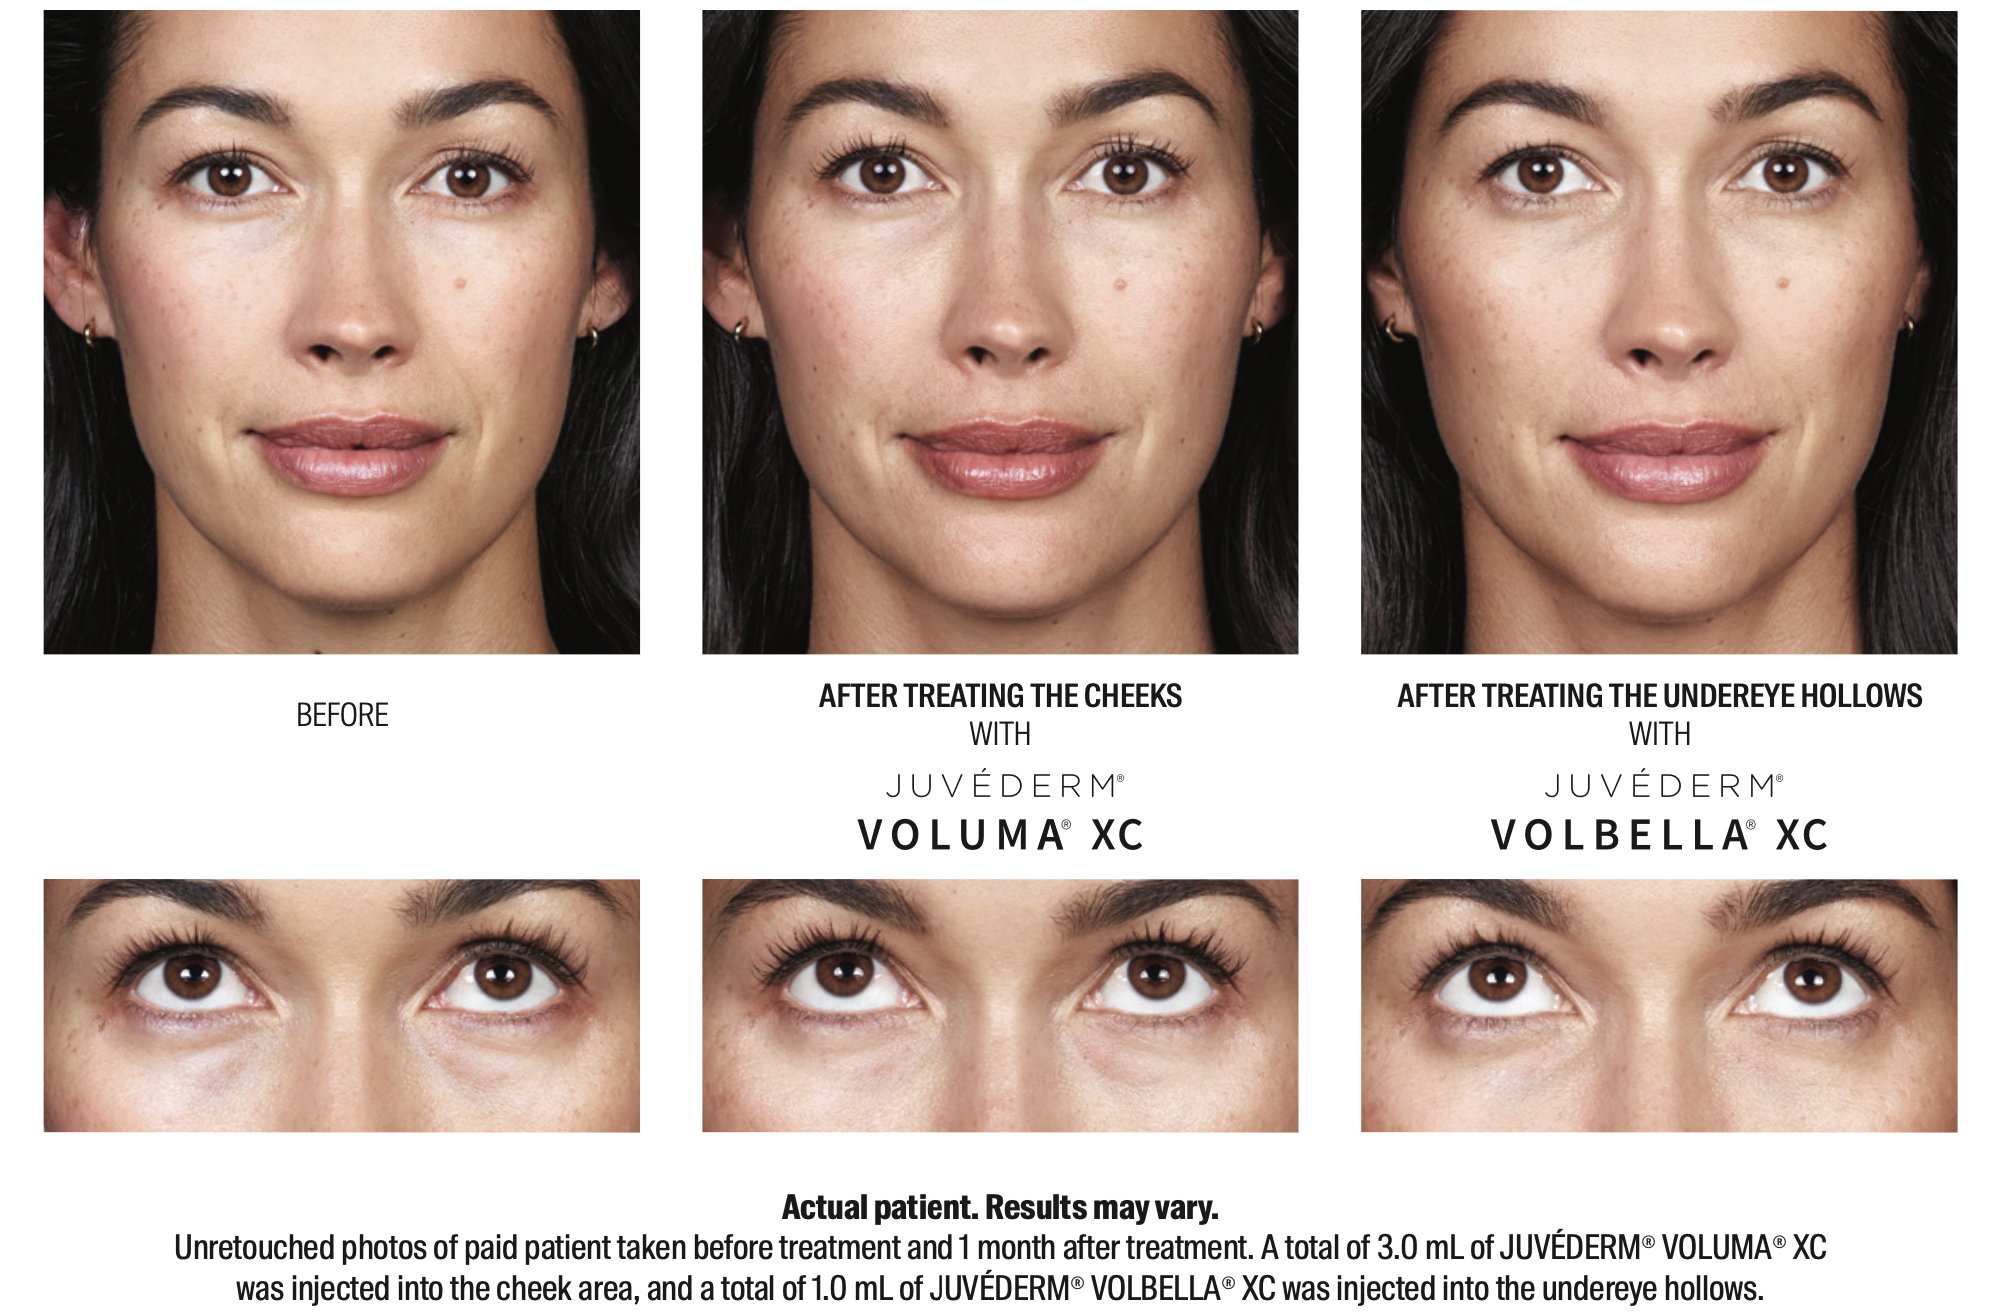 Juvederm Before and After Image